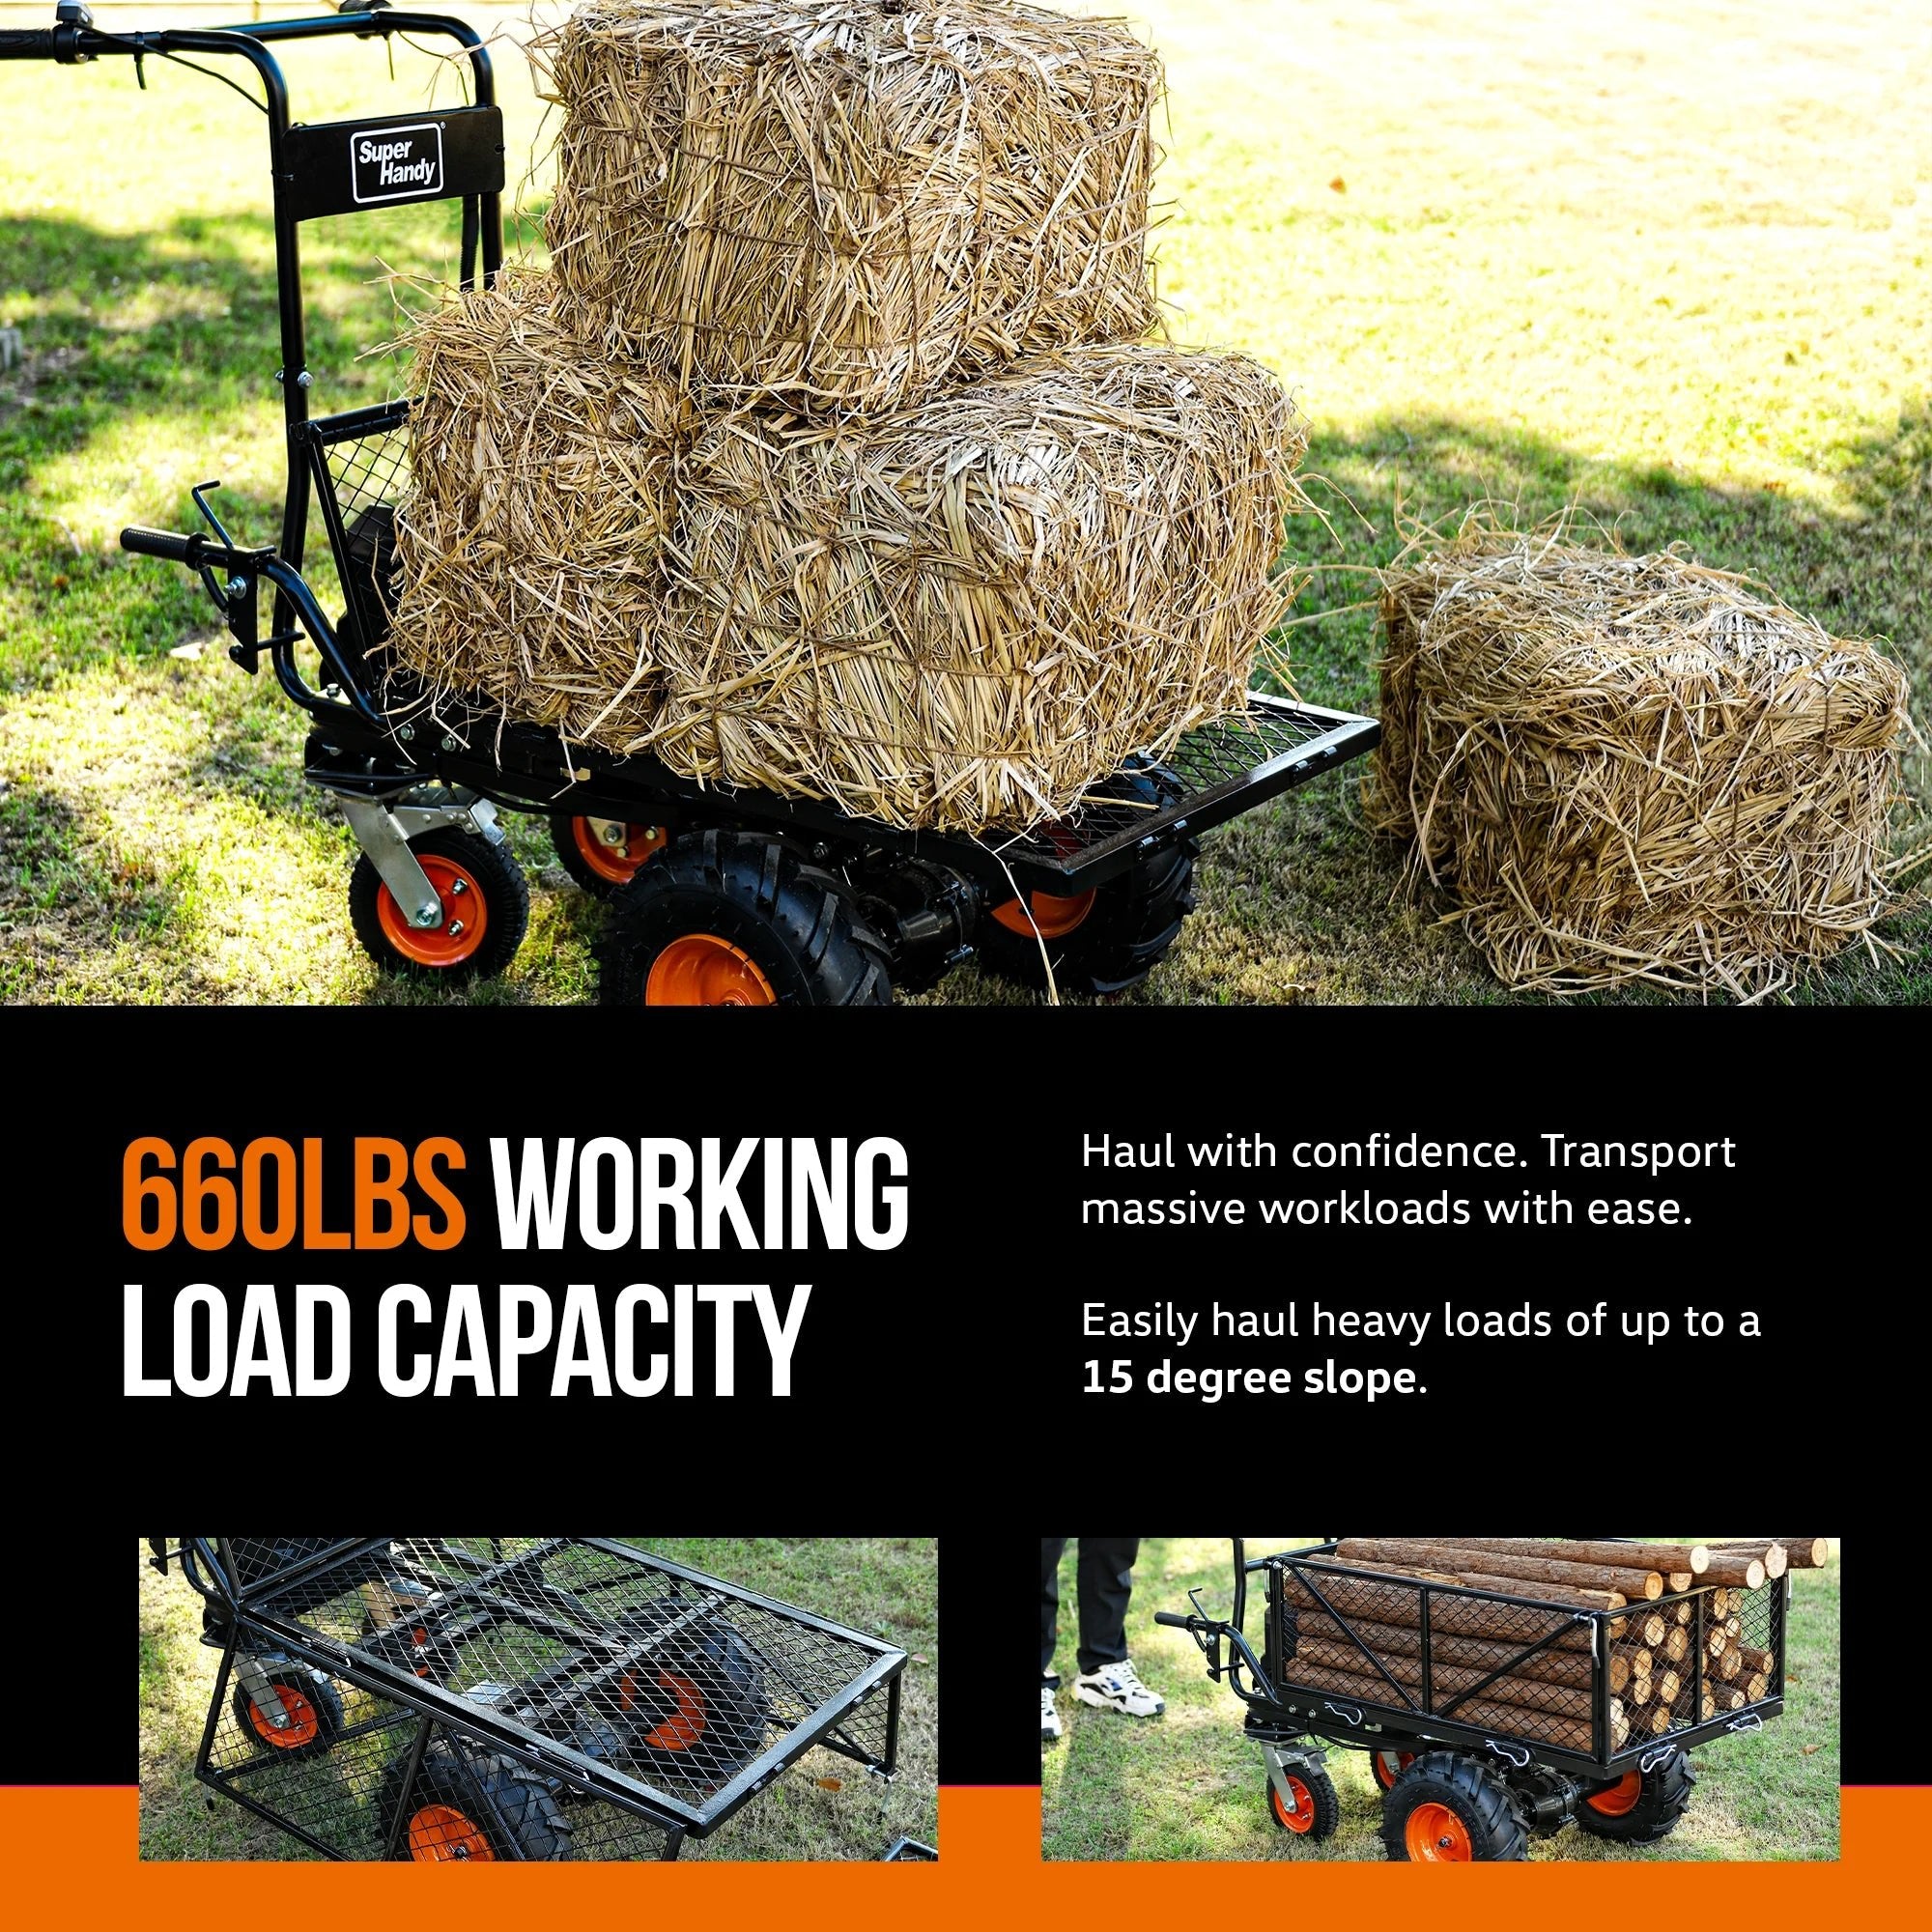 Super Handy GUO095 48V 2Ah 500 lbs. Capacity Self-Propelled Electric Utility Wagon New